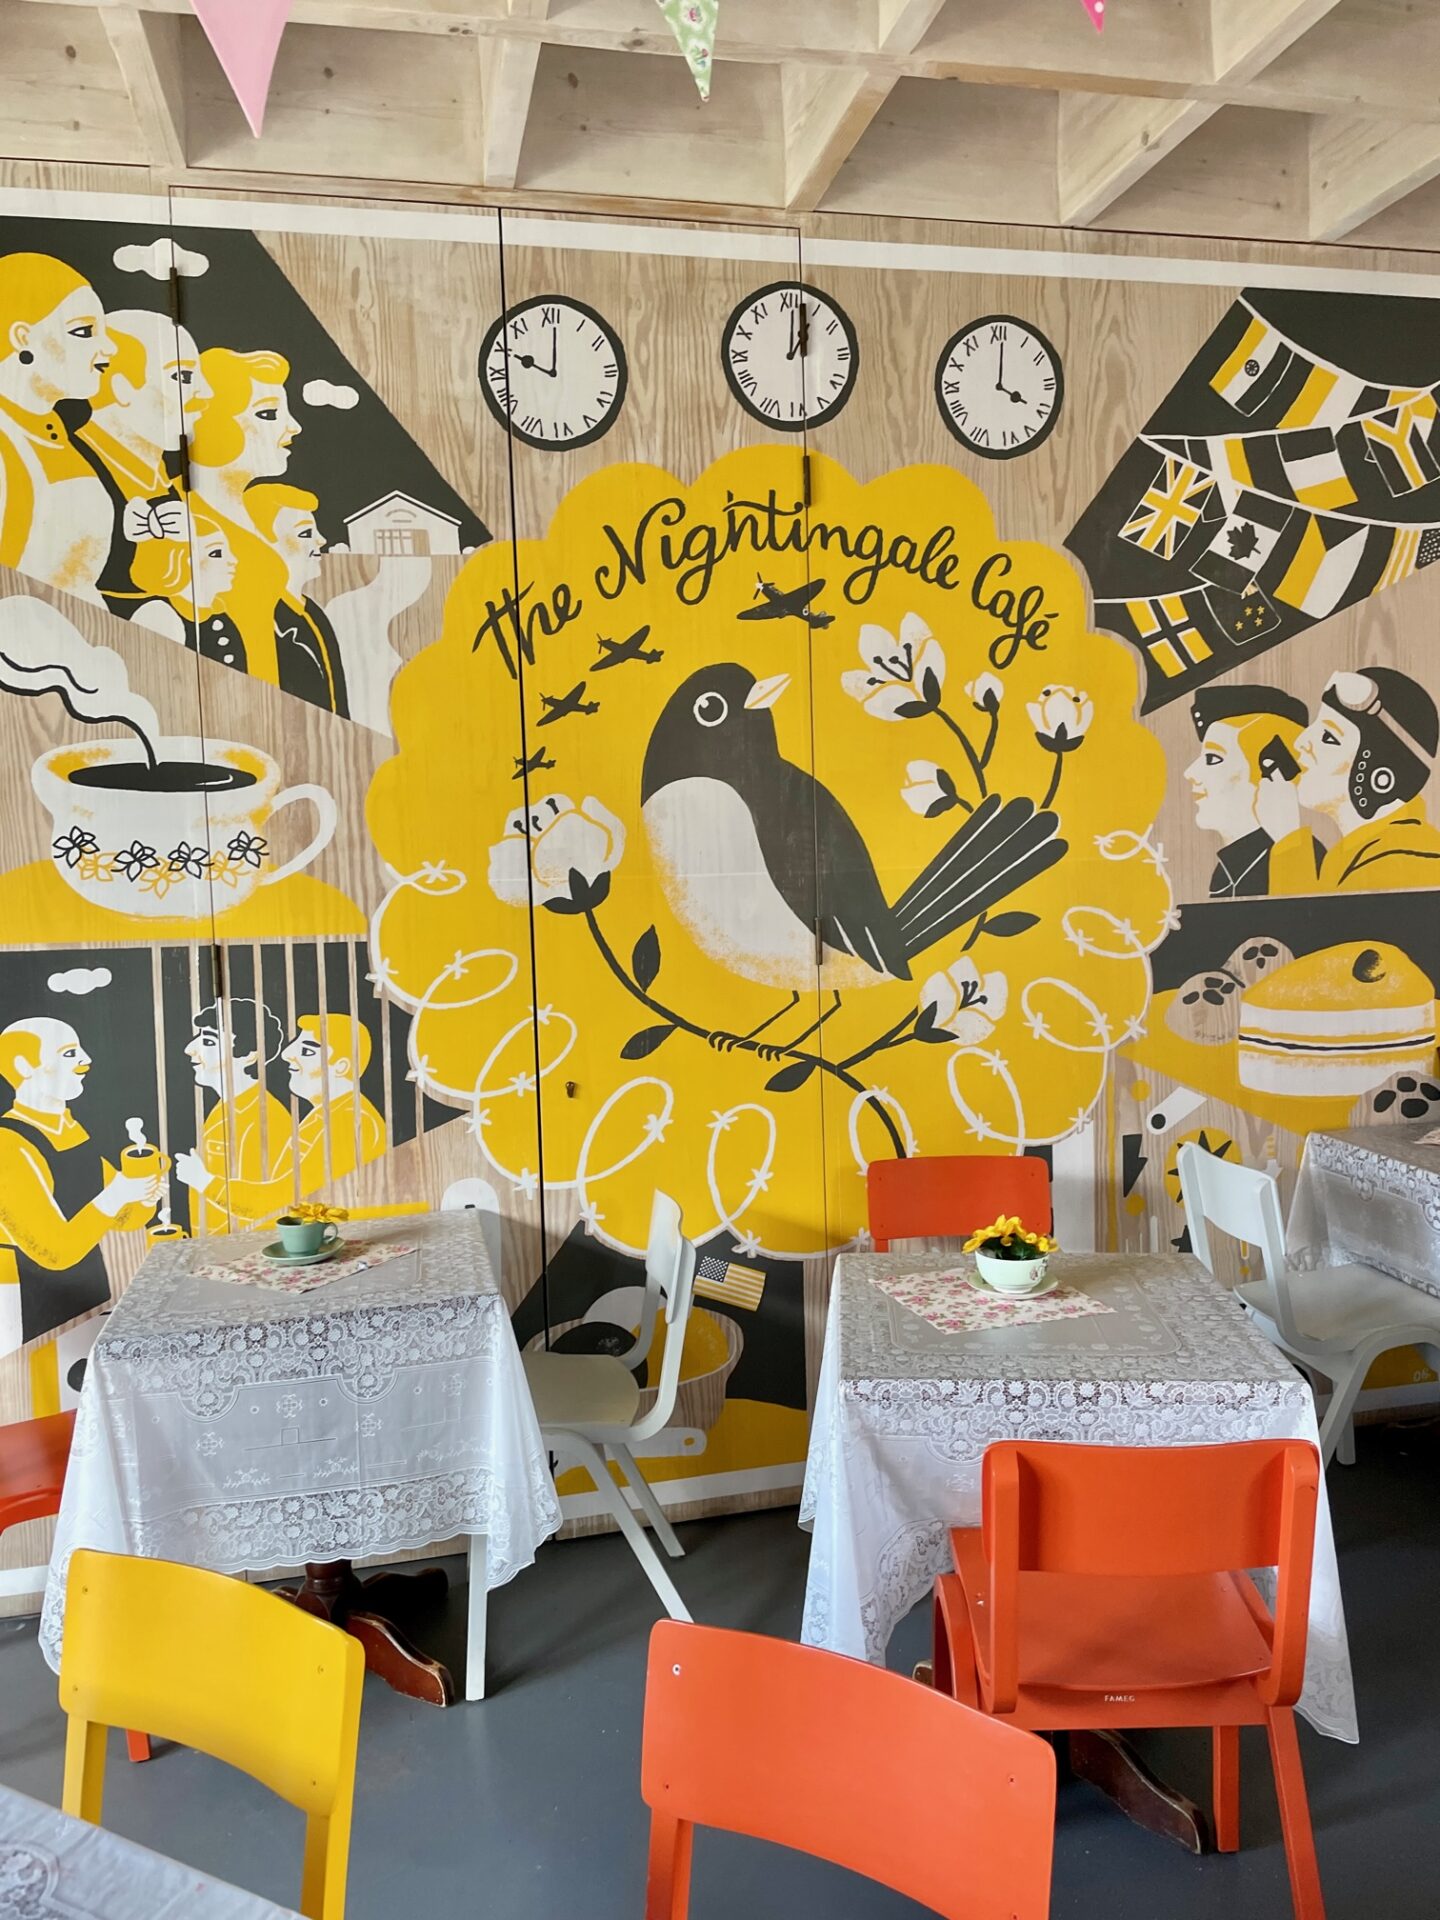 The Nightingale Cafe at Biggin Hill Memorial Museum and airport
